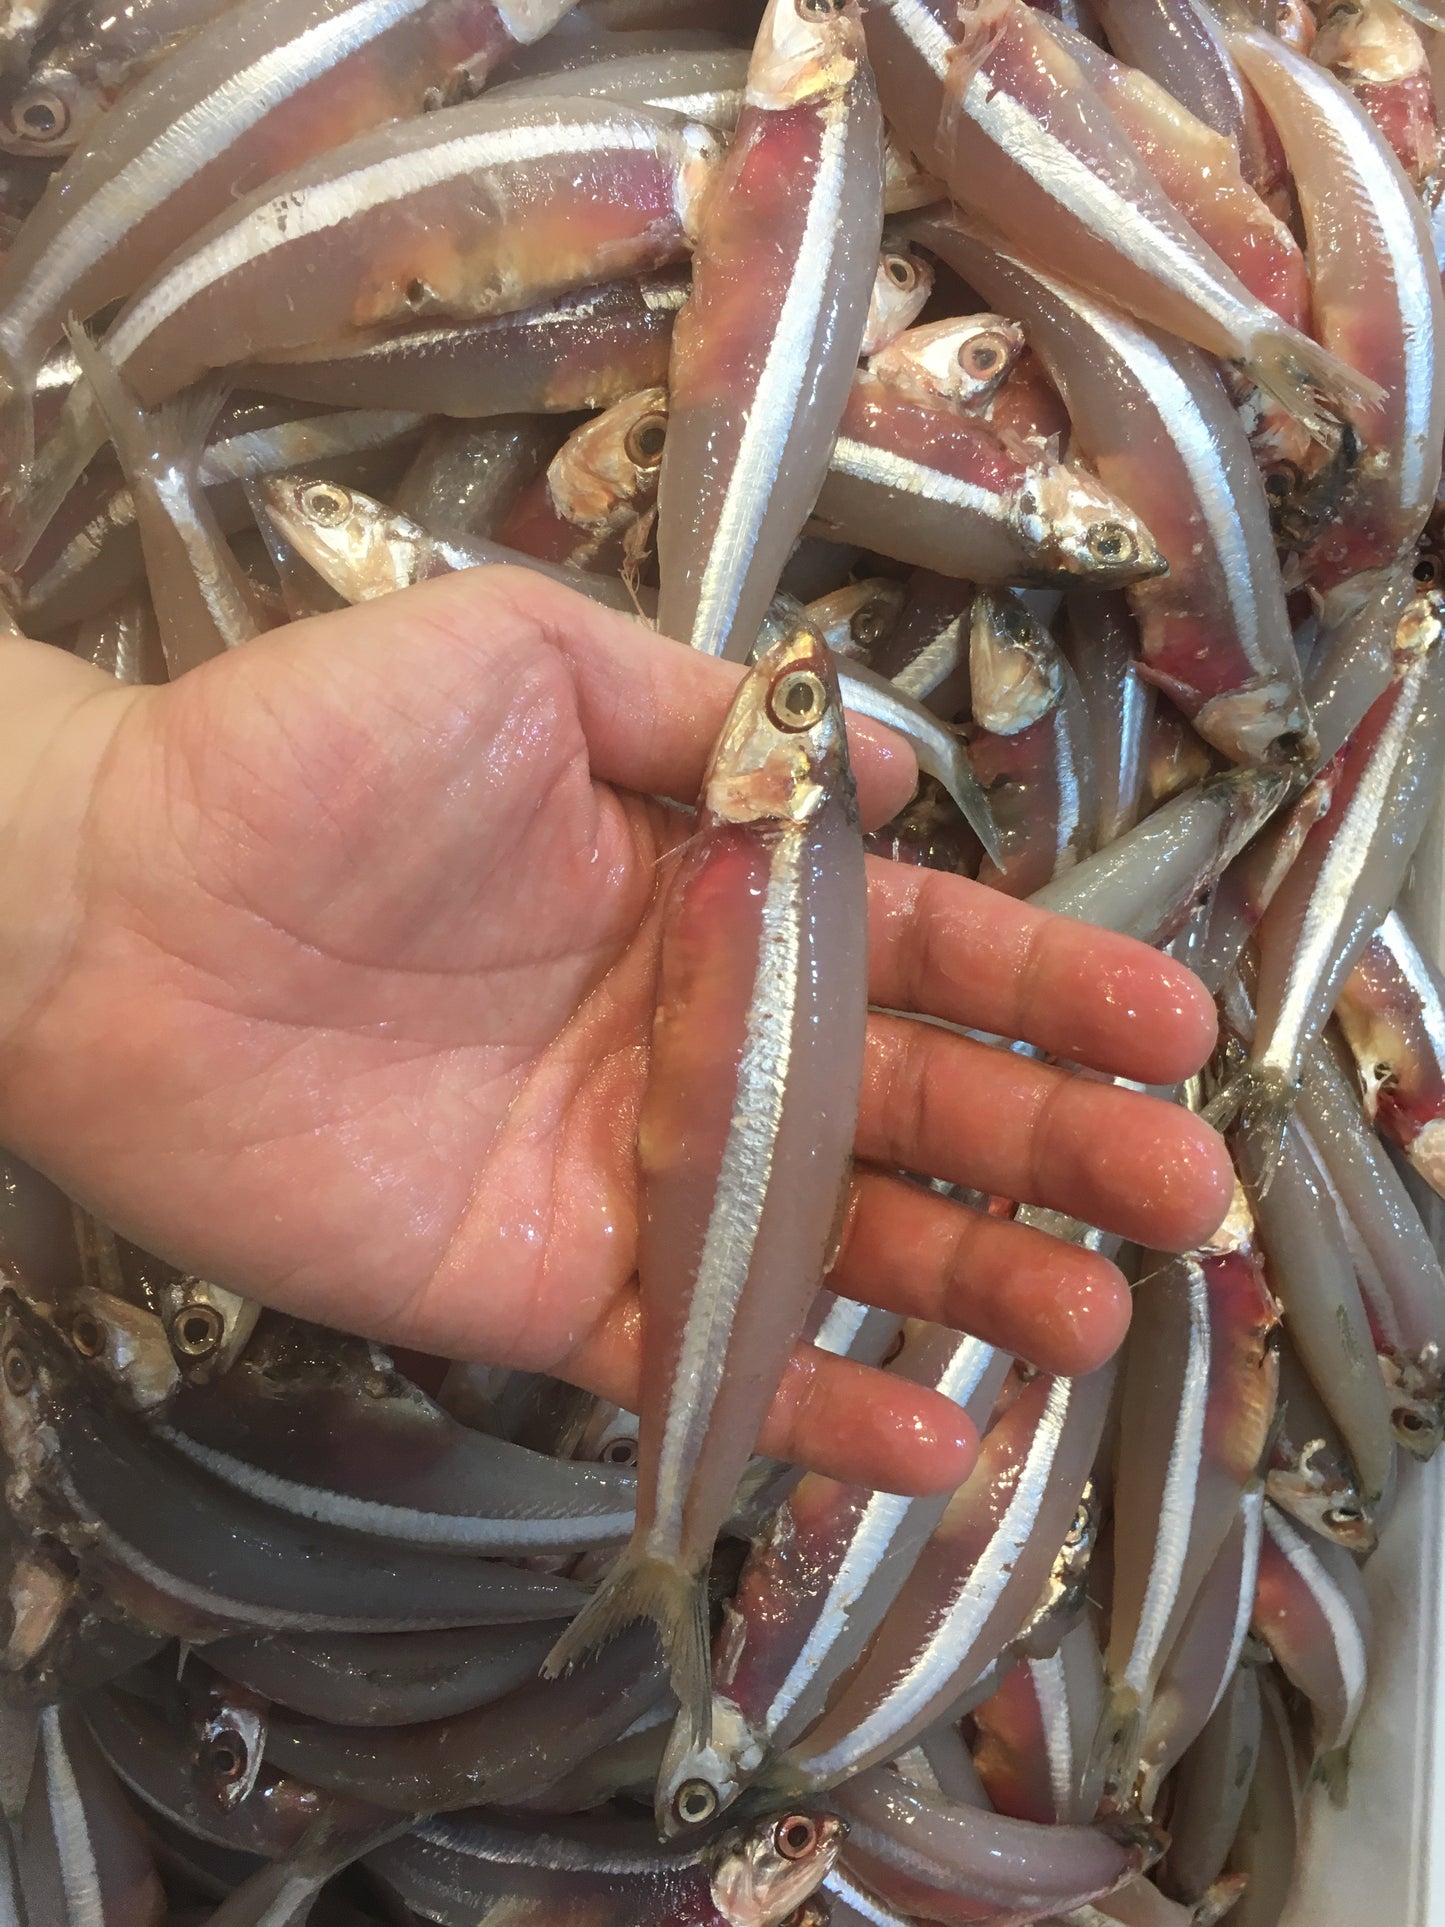 Wild anchovies/ ikan bilis (about 1kg) - Dishthefish new age fishmonger fresh fish seafood online delivery wet market ikan bilis pacific indian anchovies large big indonesia malaysia 渔民 巴刹 新加坡 鲜鱼 网购 送货